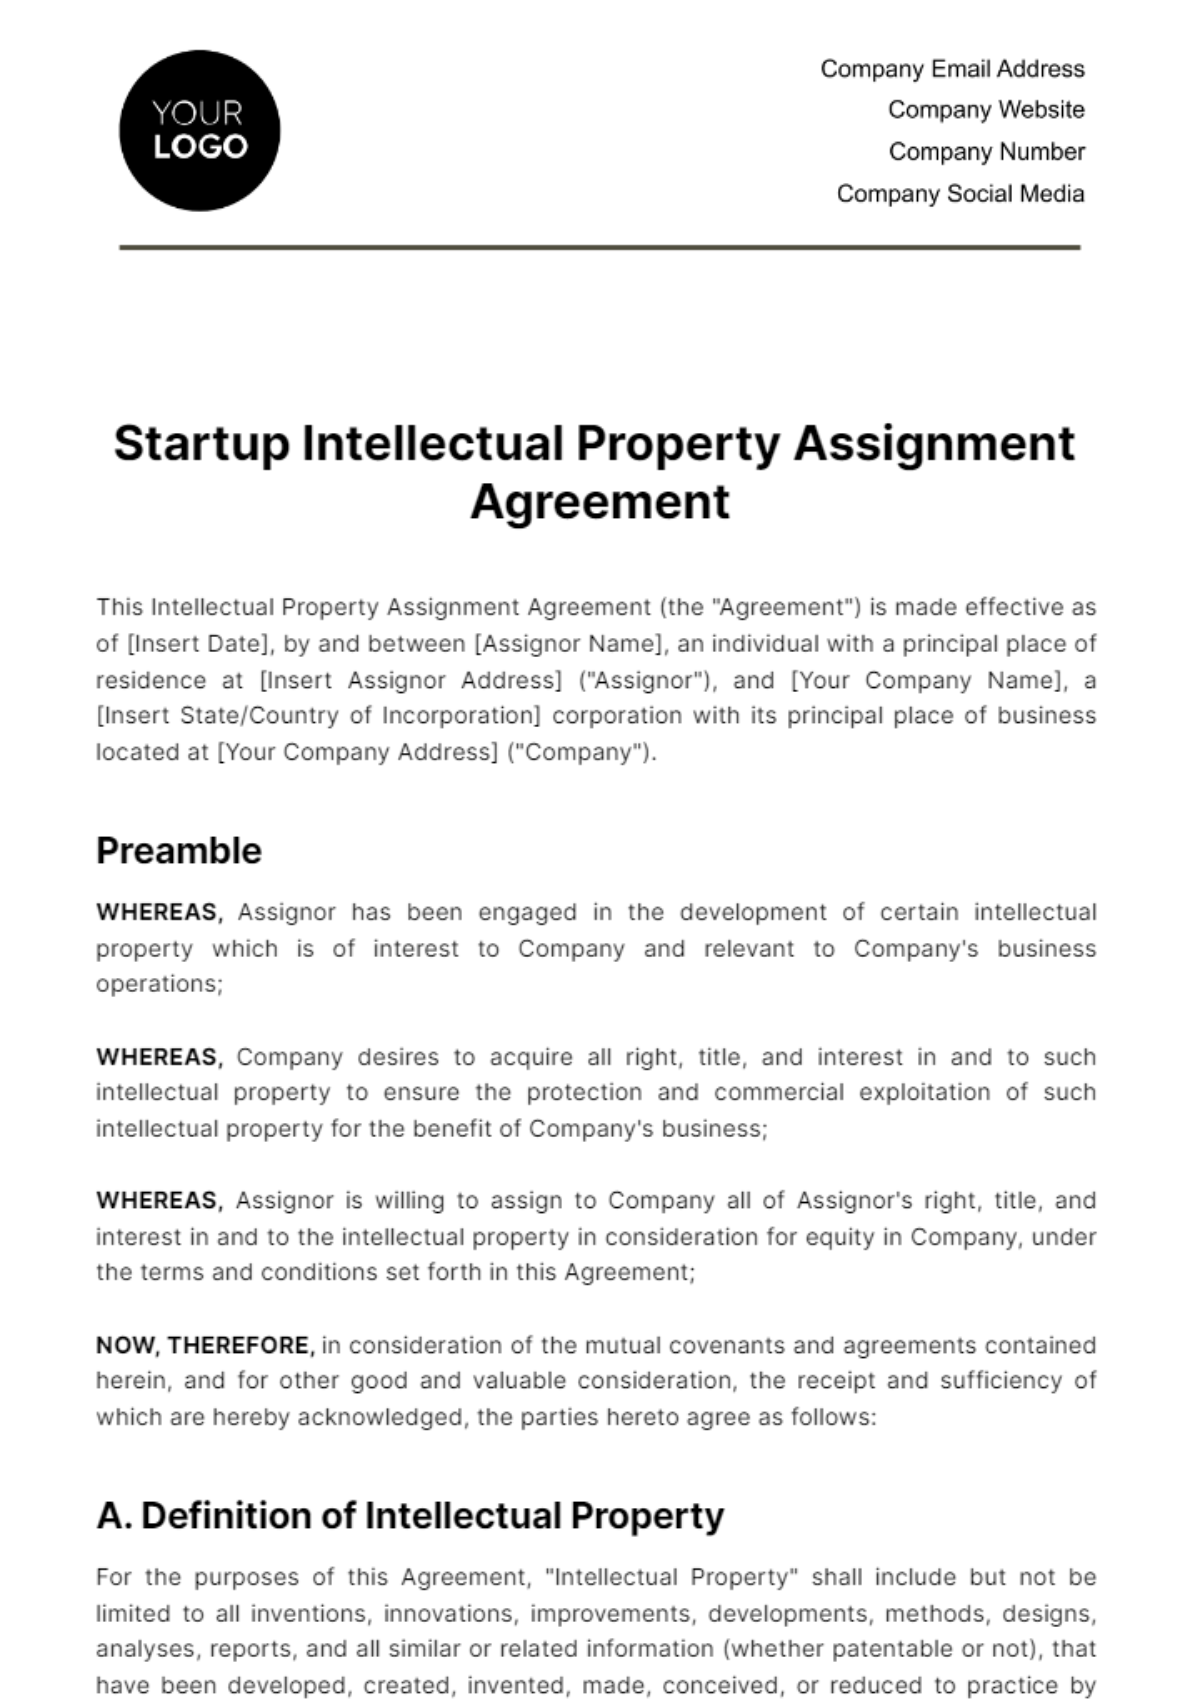 Startup Intellectual Property Assignment Agreement Template